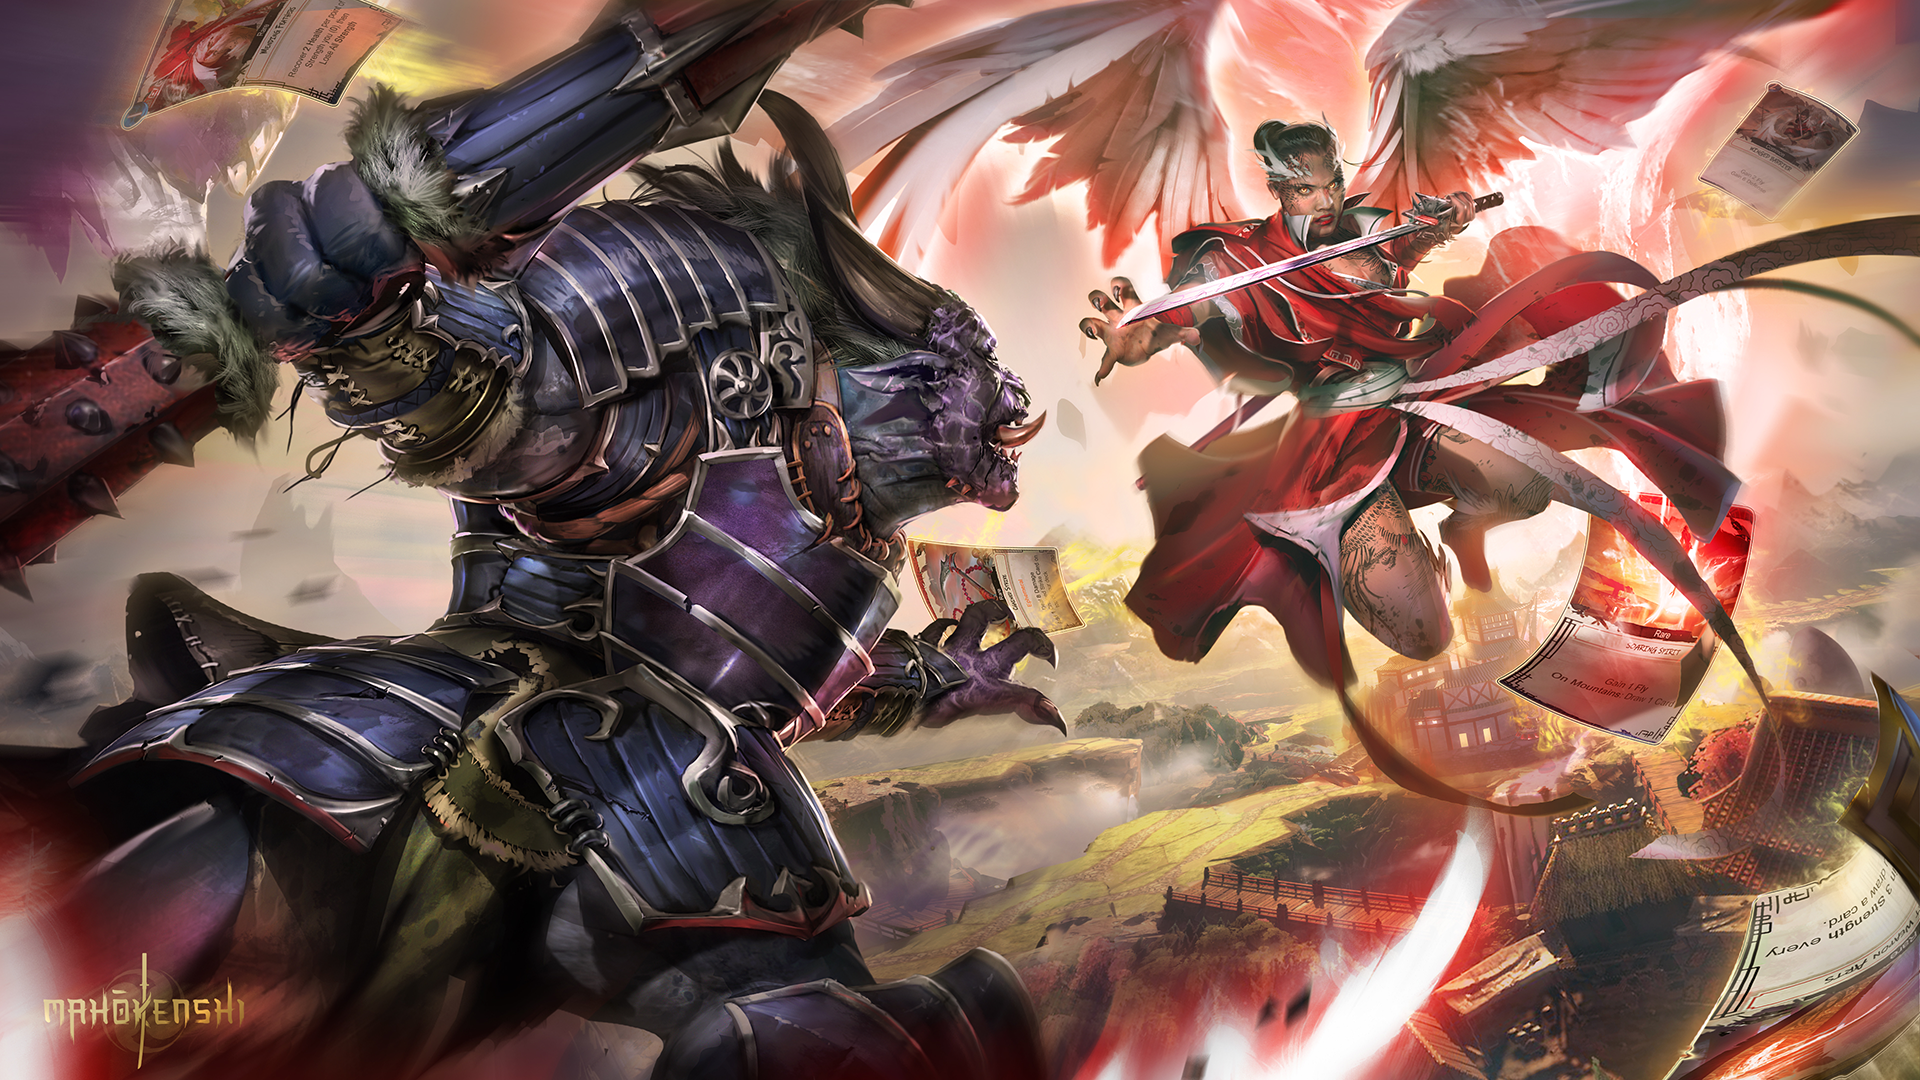 Illustration of a winged female samurai in a red robe confronting a beat-like warrior with horns and tusks